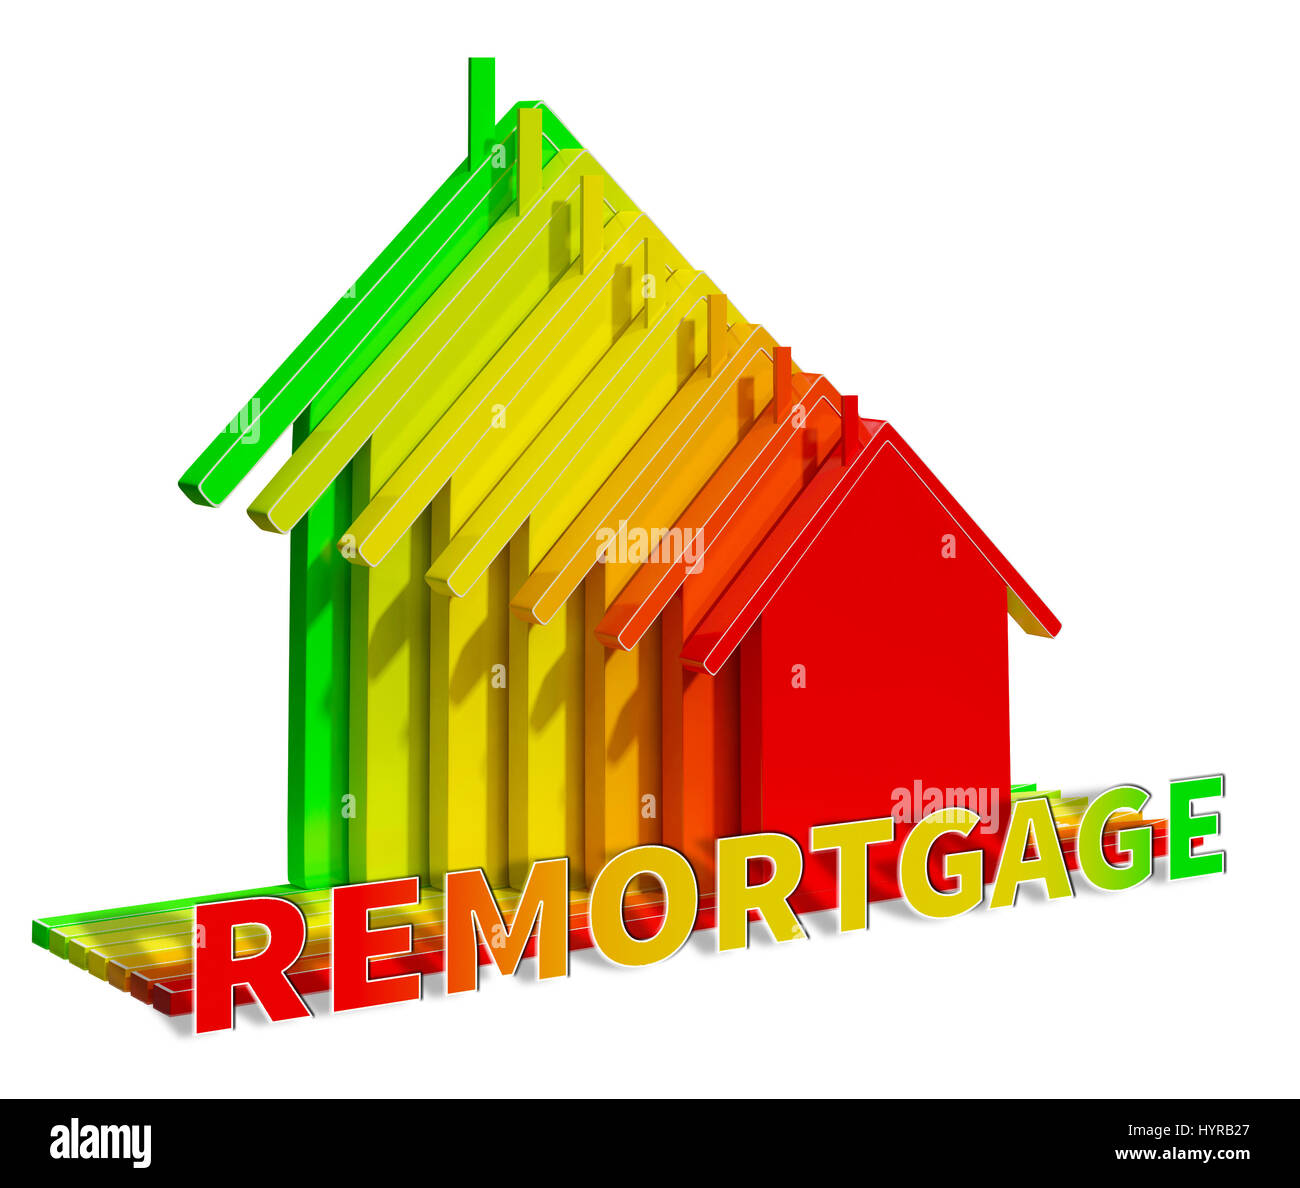 Remortgage Eco House Means Real Estate 3d Illustration Stock Photo